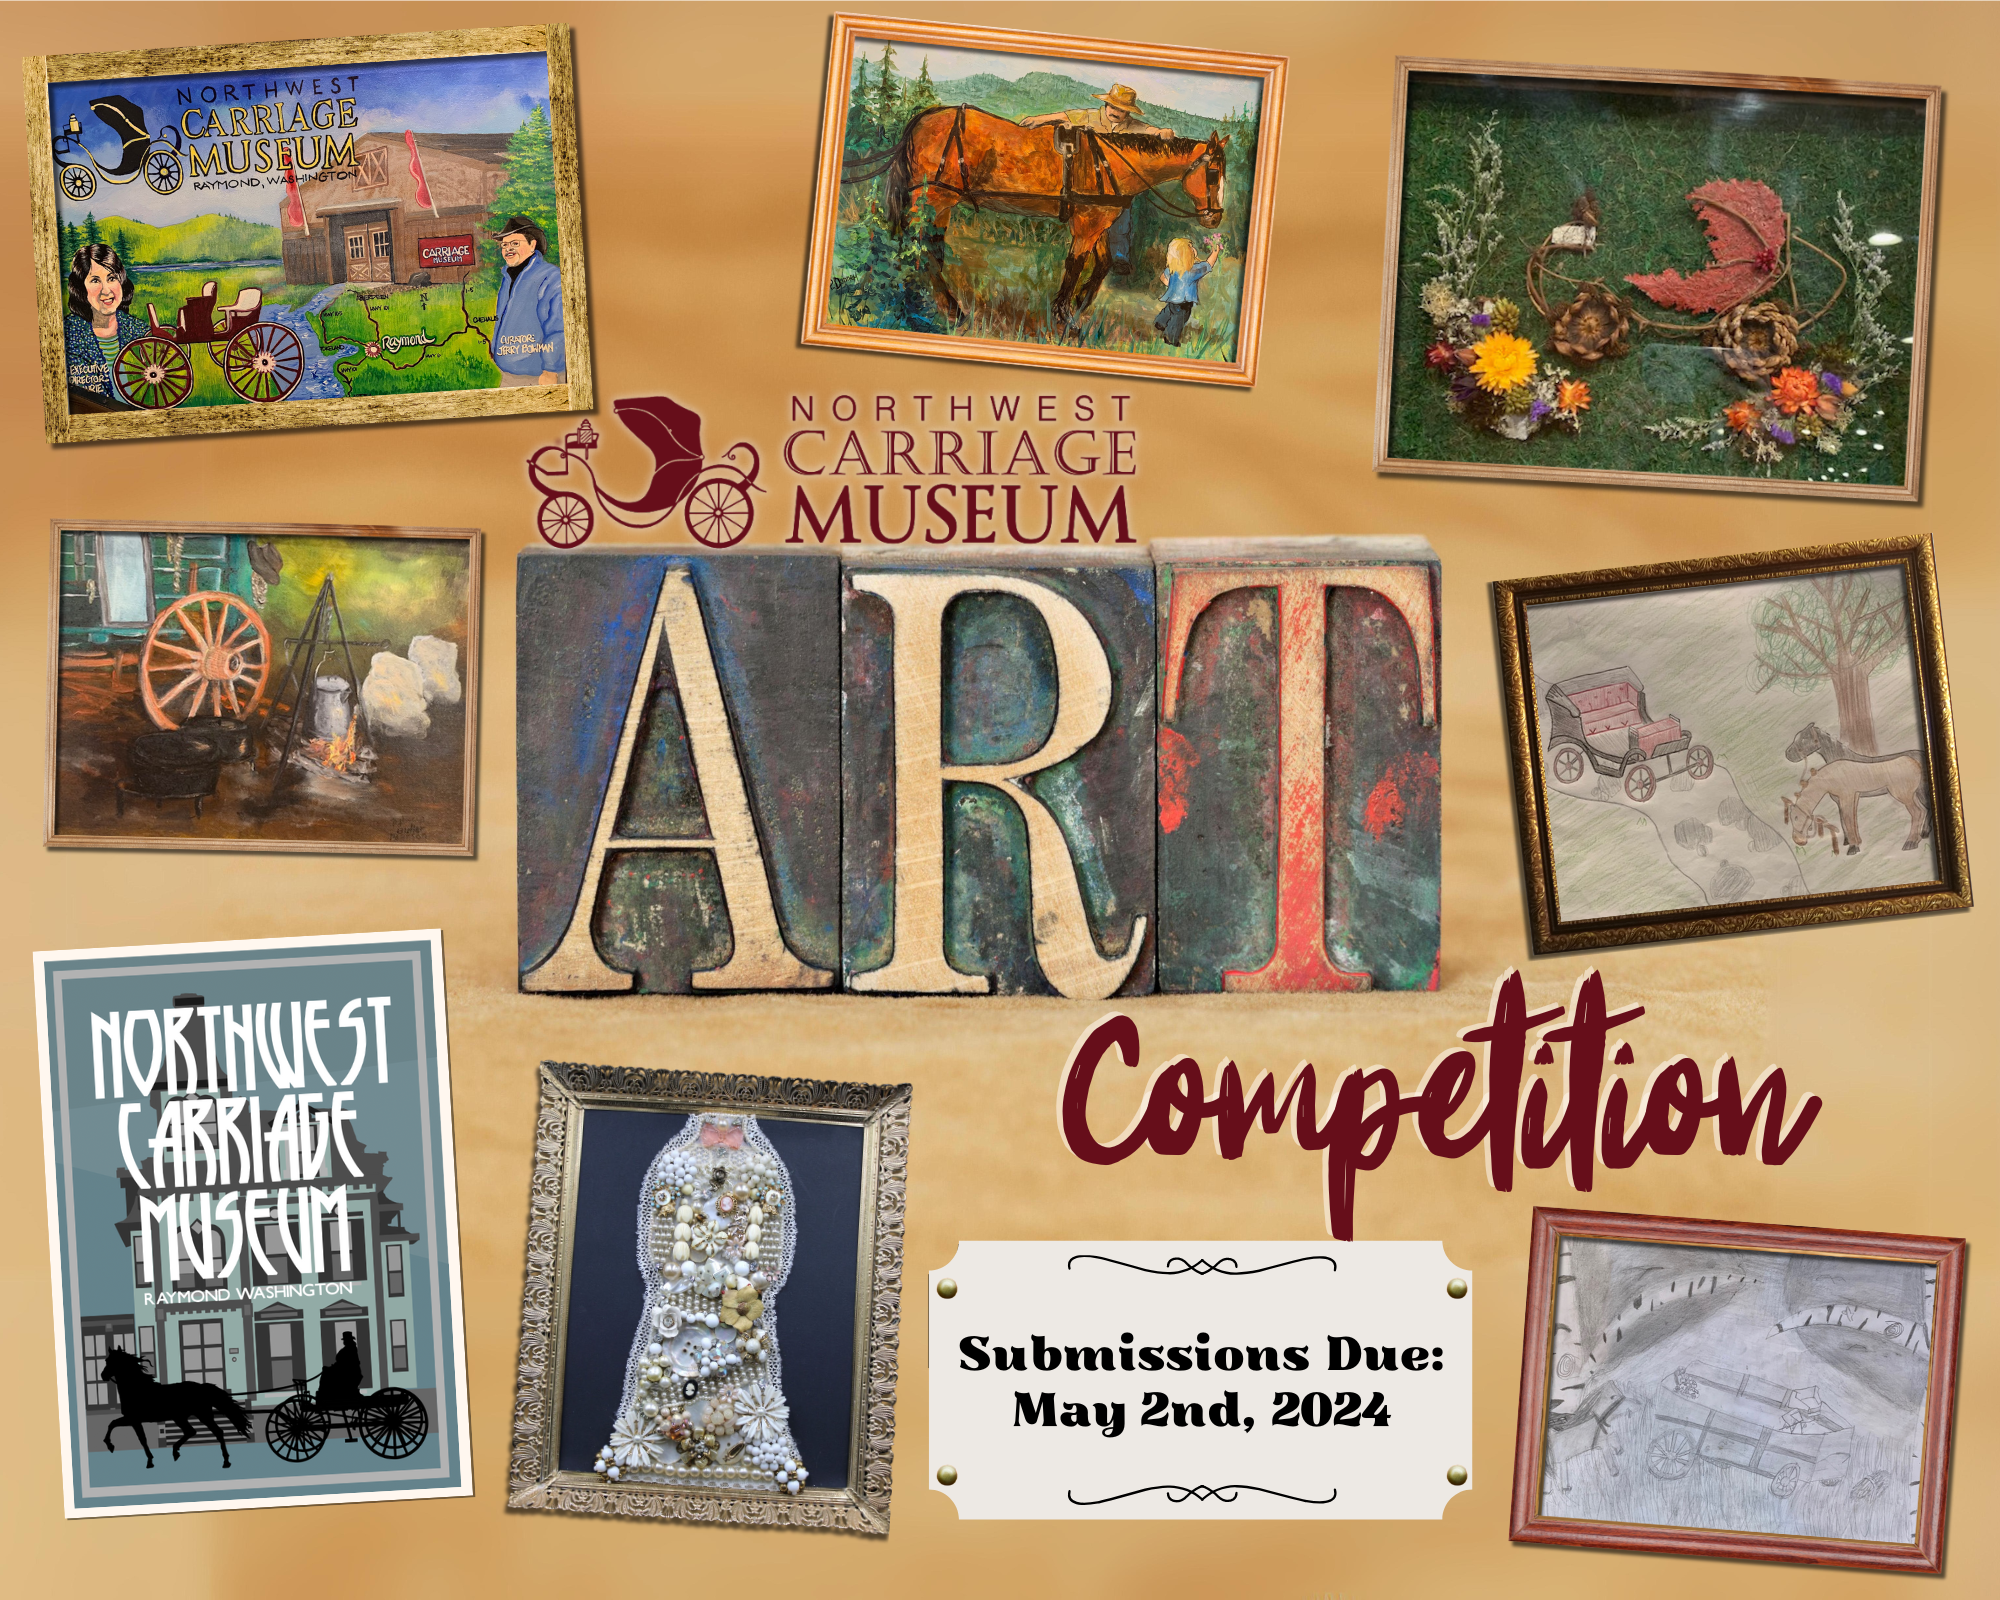 Event Flyer for the Northwest Carriage Museum's 2024 Art Competition. Click for more details.